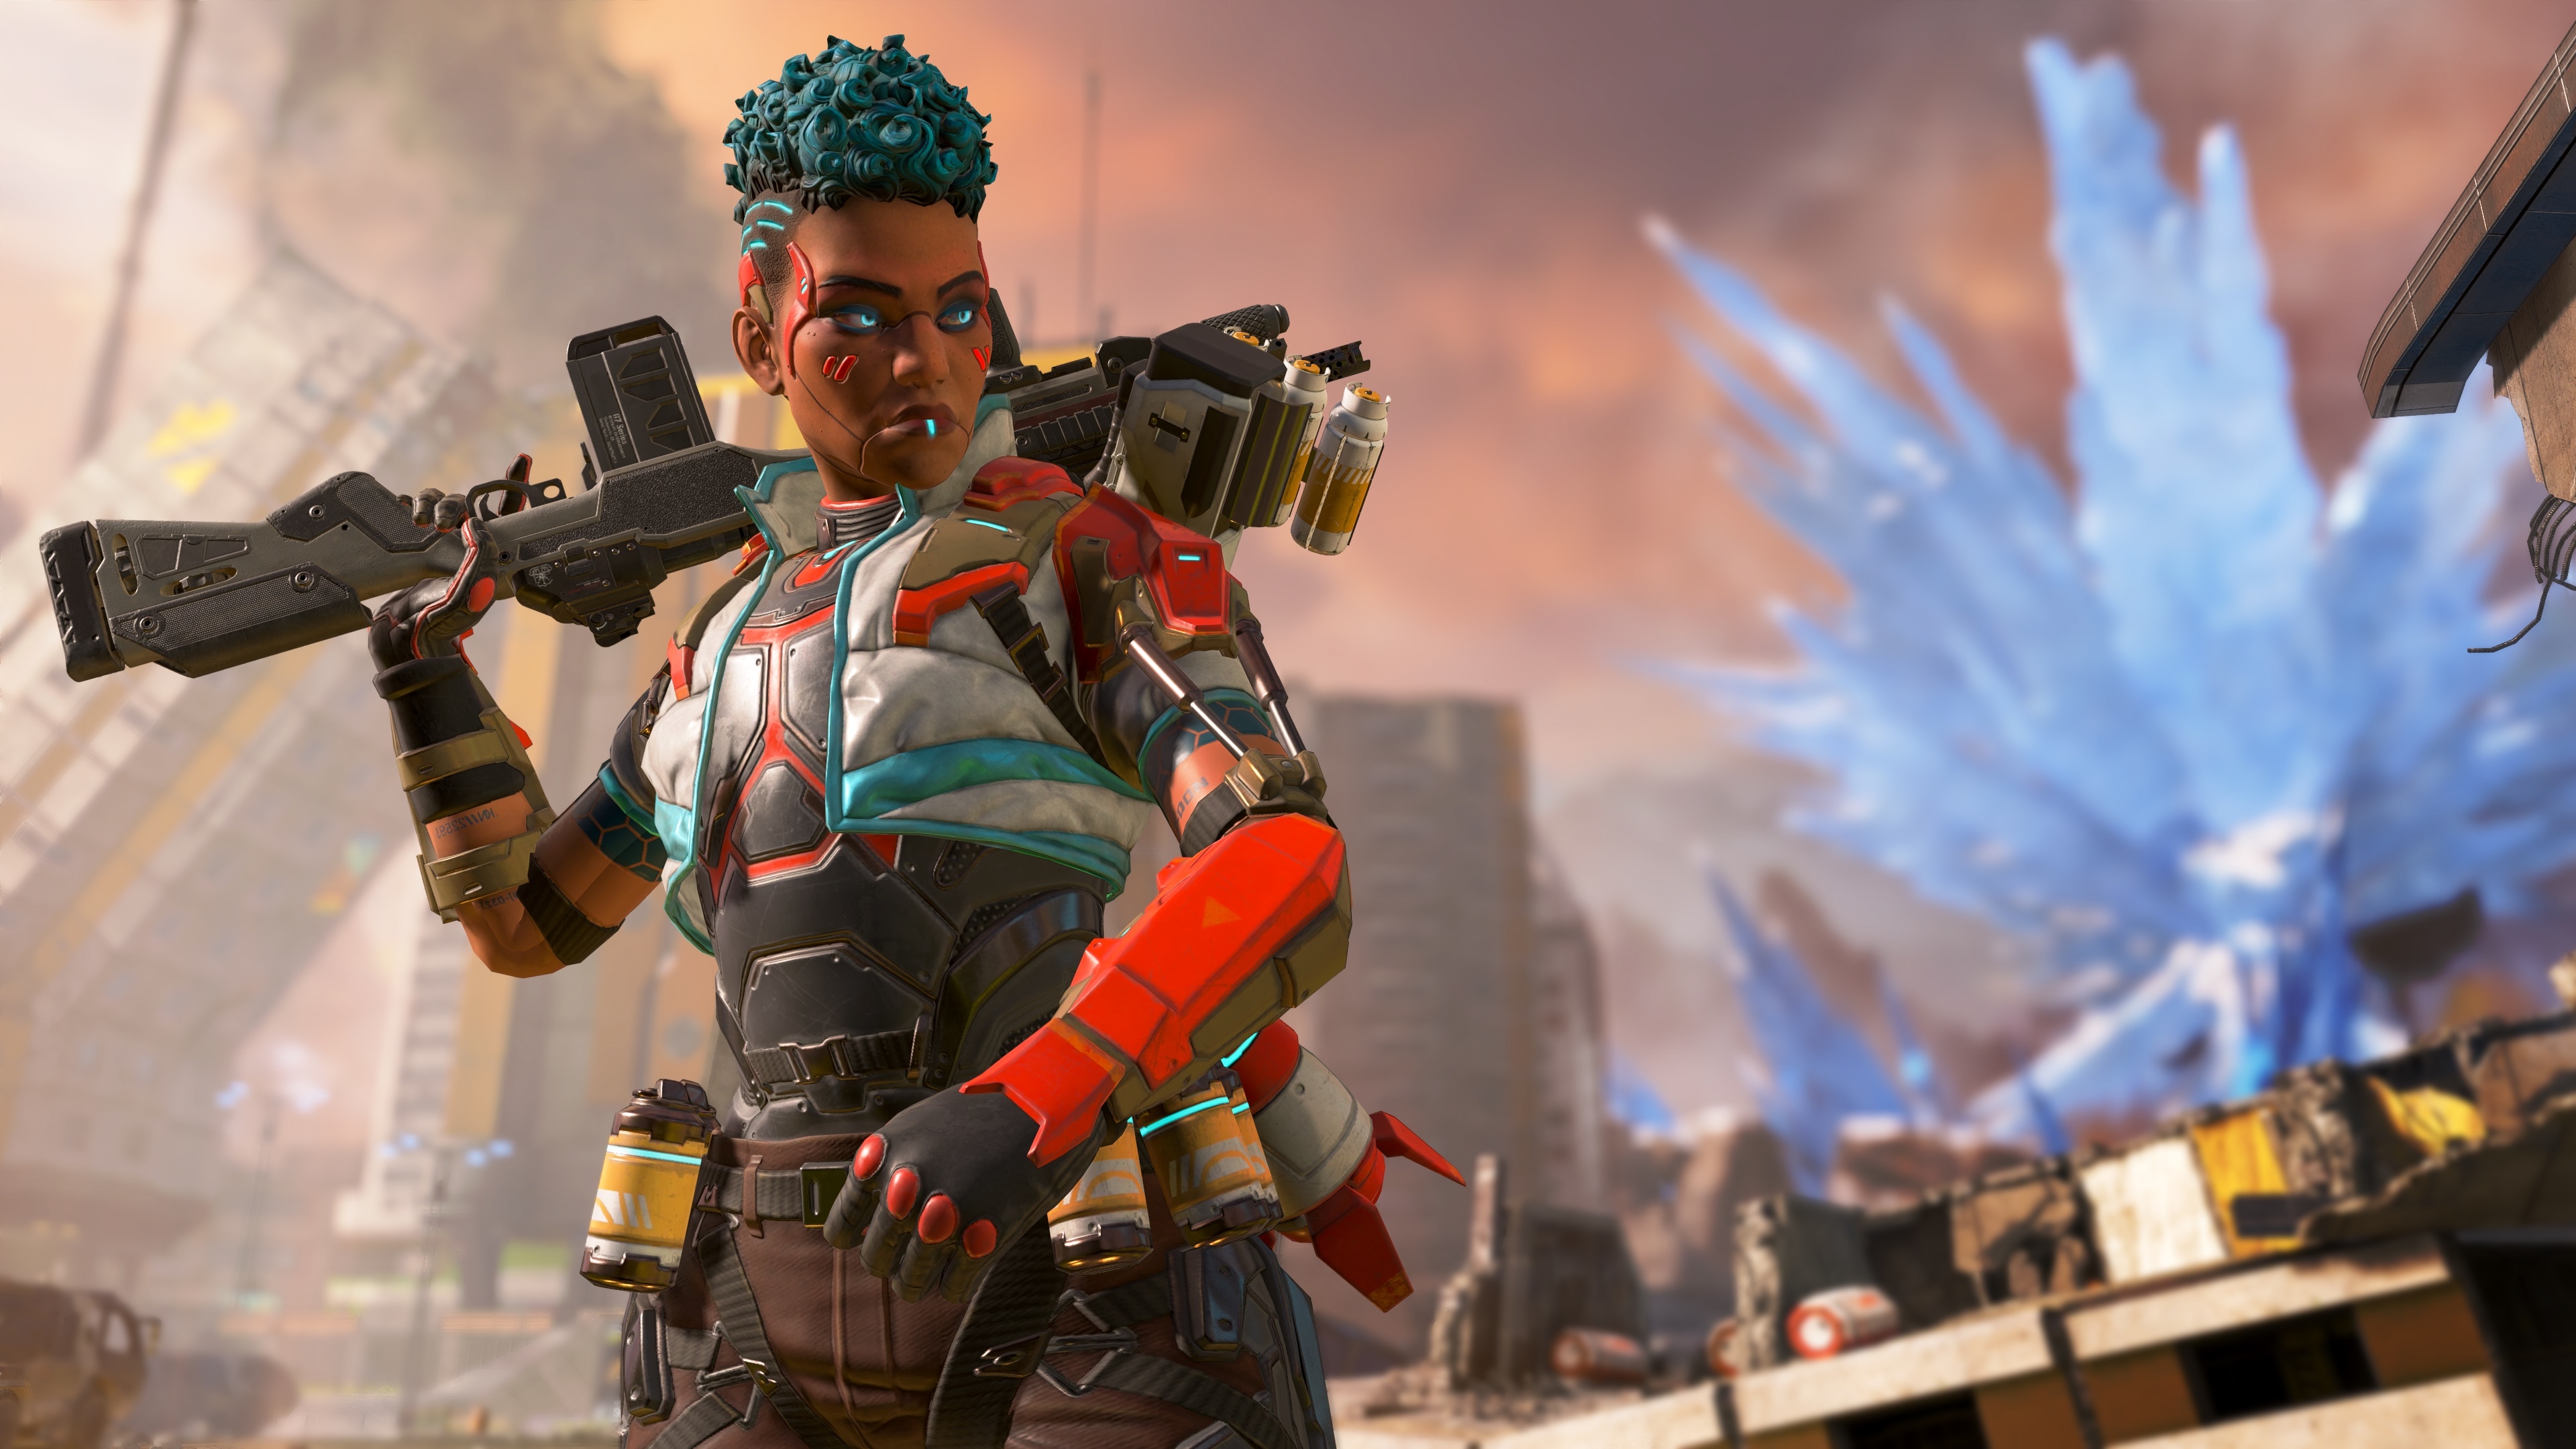 Bangalore 4k Apex Legends Wallpaper Hd Games 4k Wallpapers Images Photos And Background